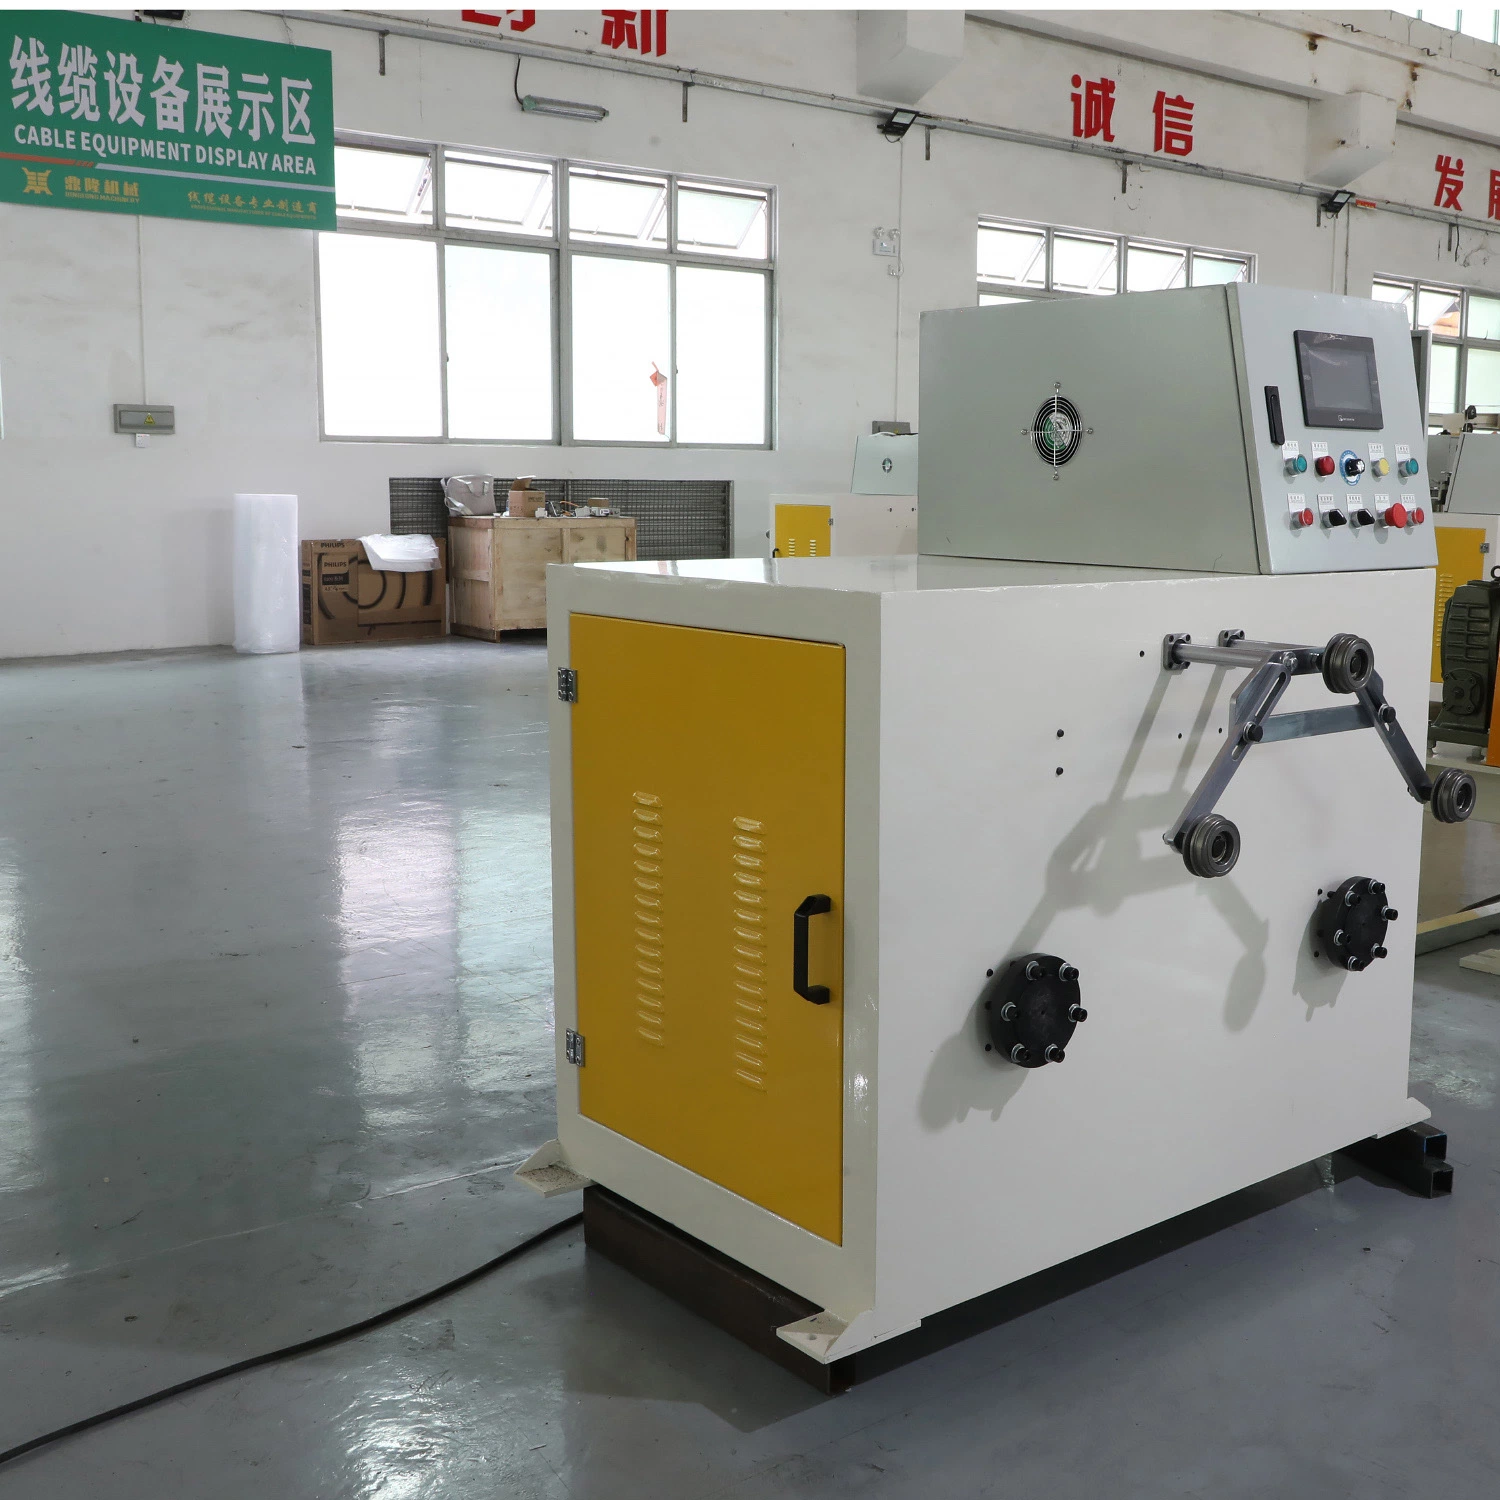 Optical Cable Production Line Equipment